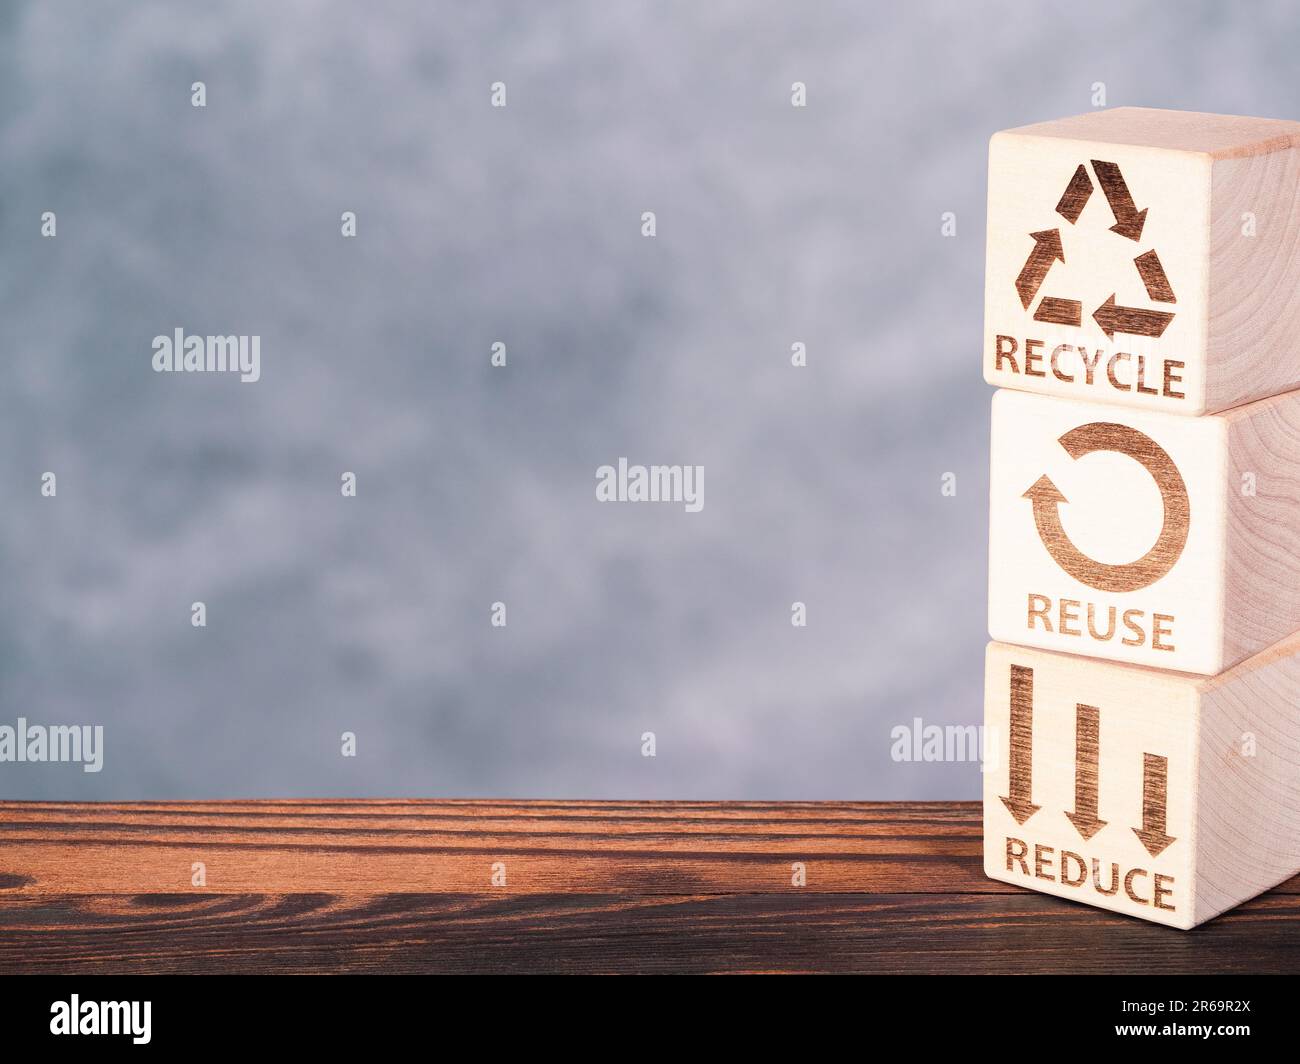 Reduce, Reuse, and Recycle symbols as an environmental conservation business concept Stock Photo